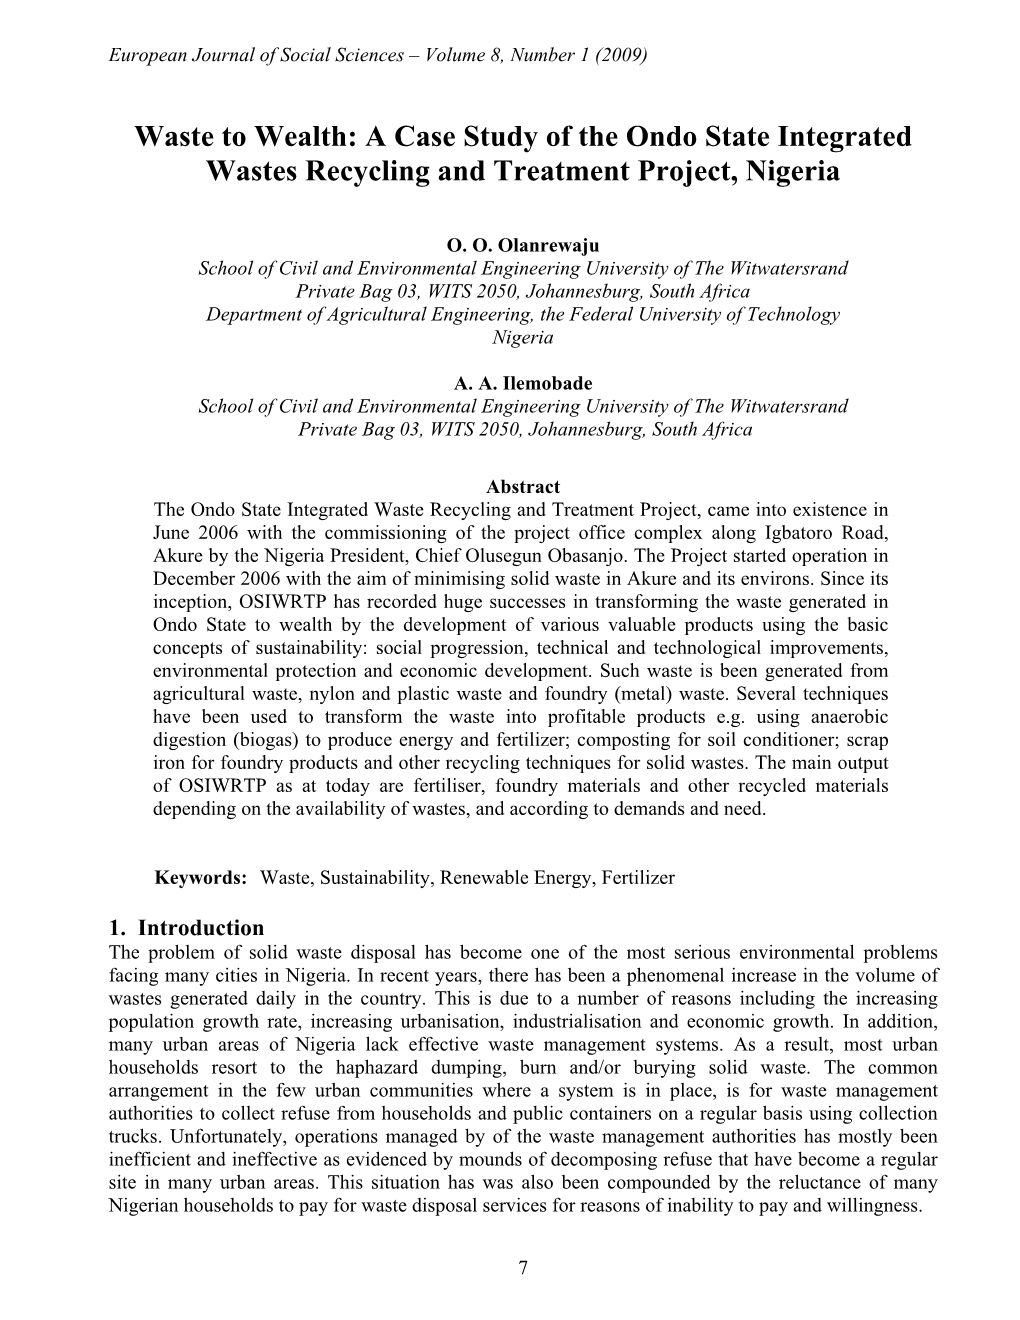 Waste to Wealth: a Case Study of the Ondo State Integrated Wastes Recycling and Treatment Project, Nigeria